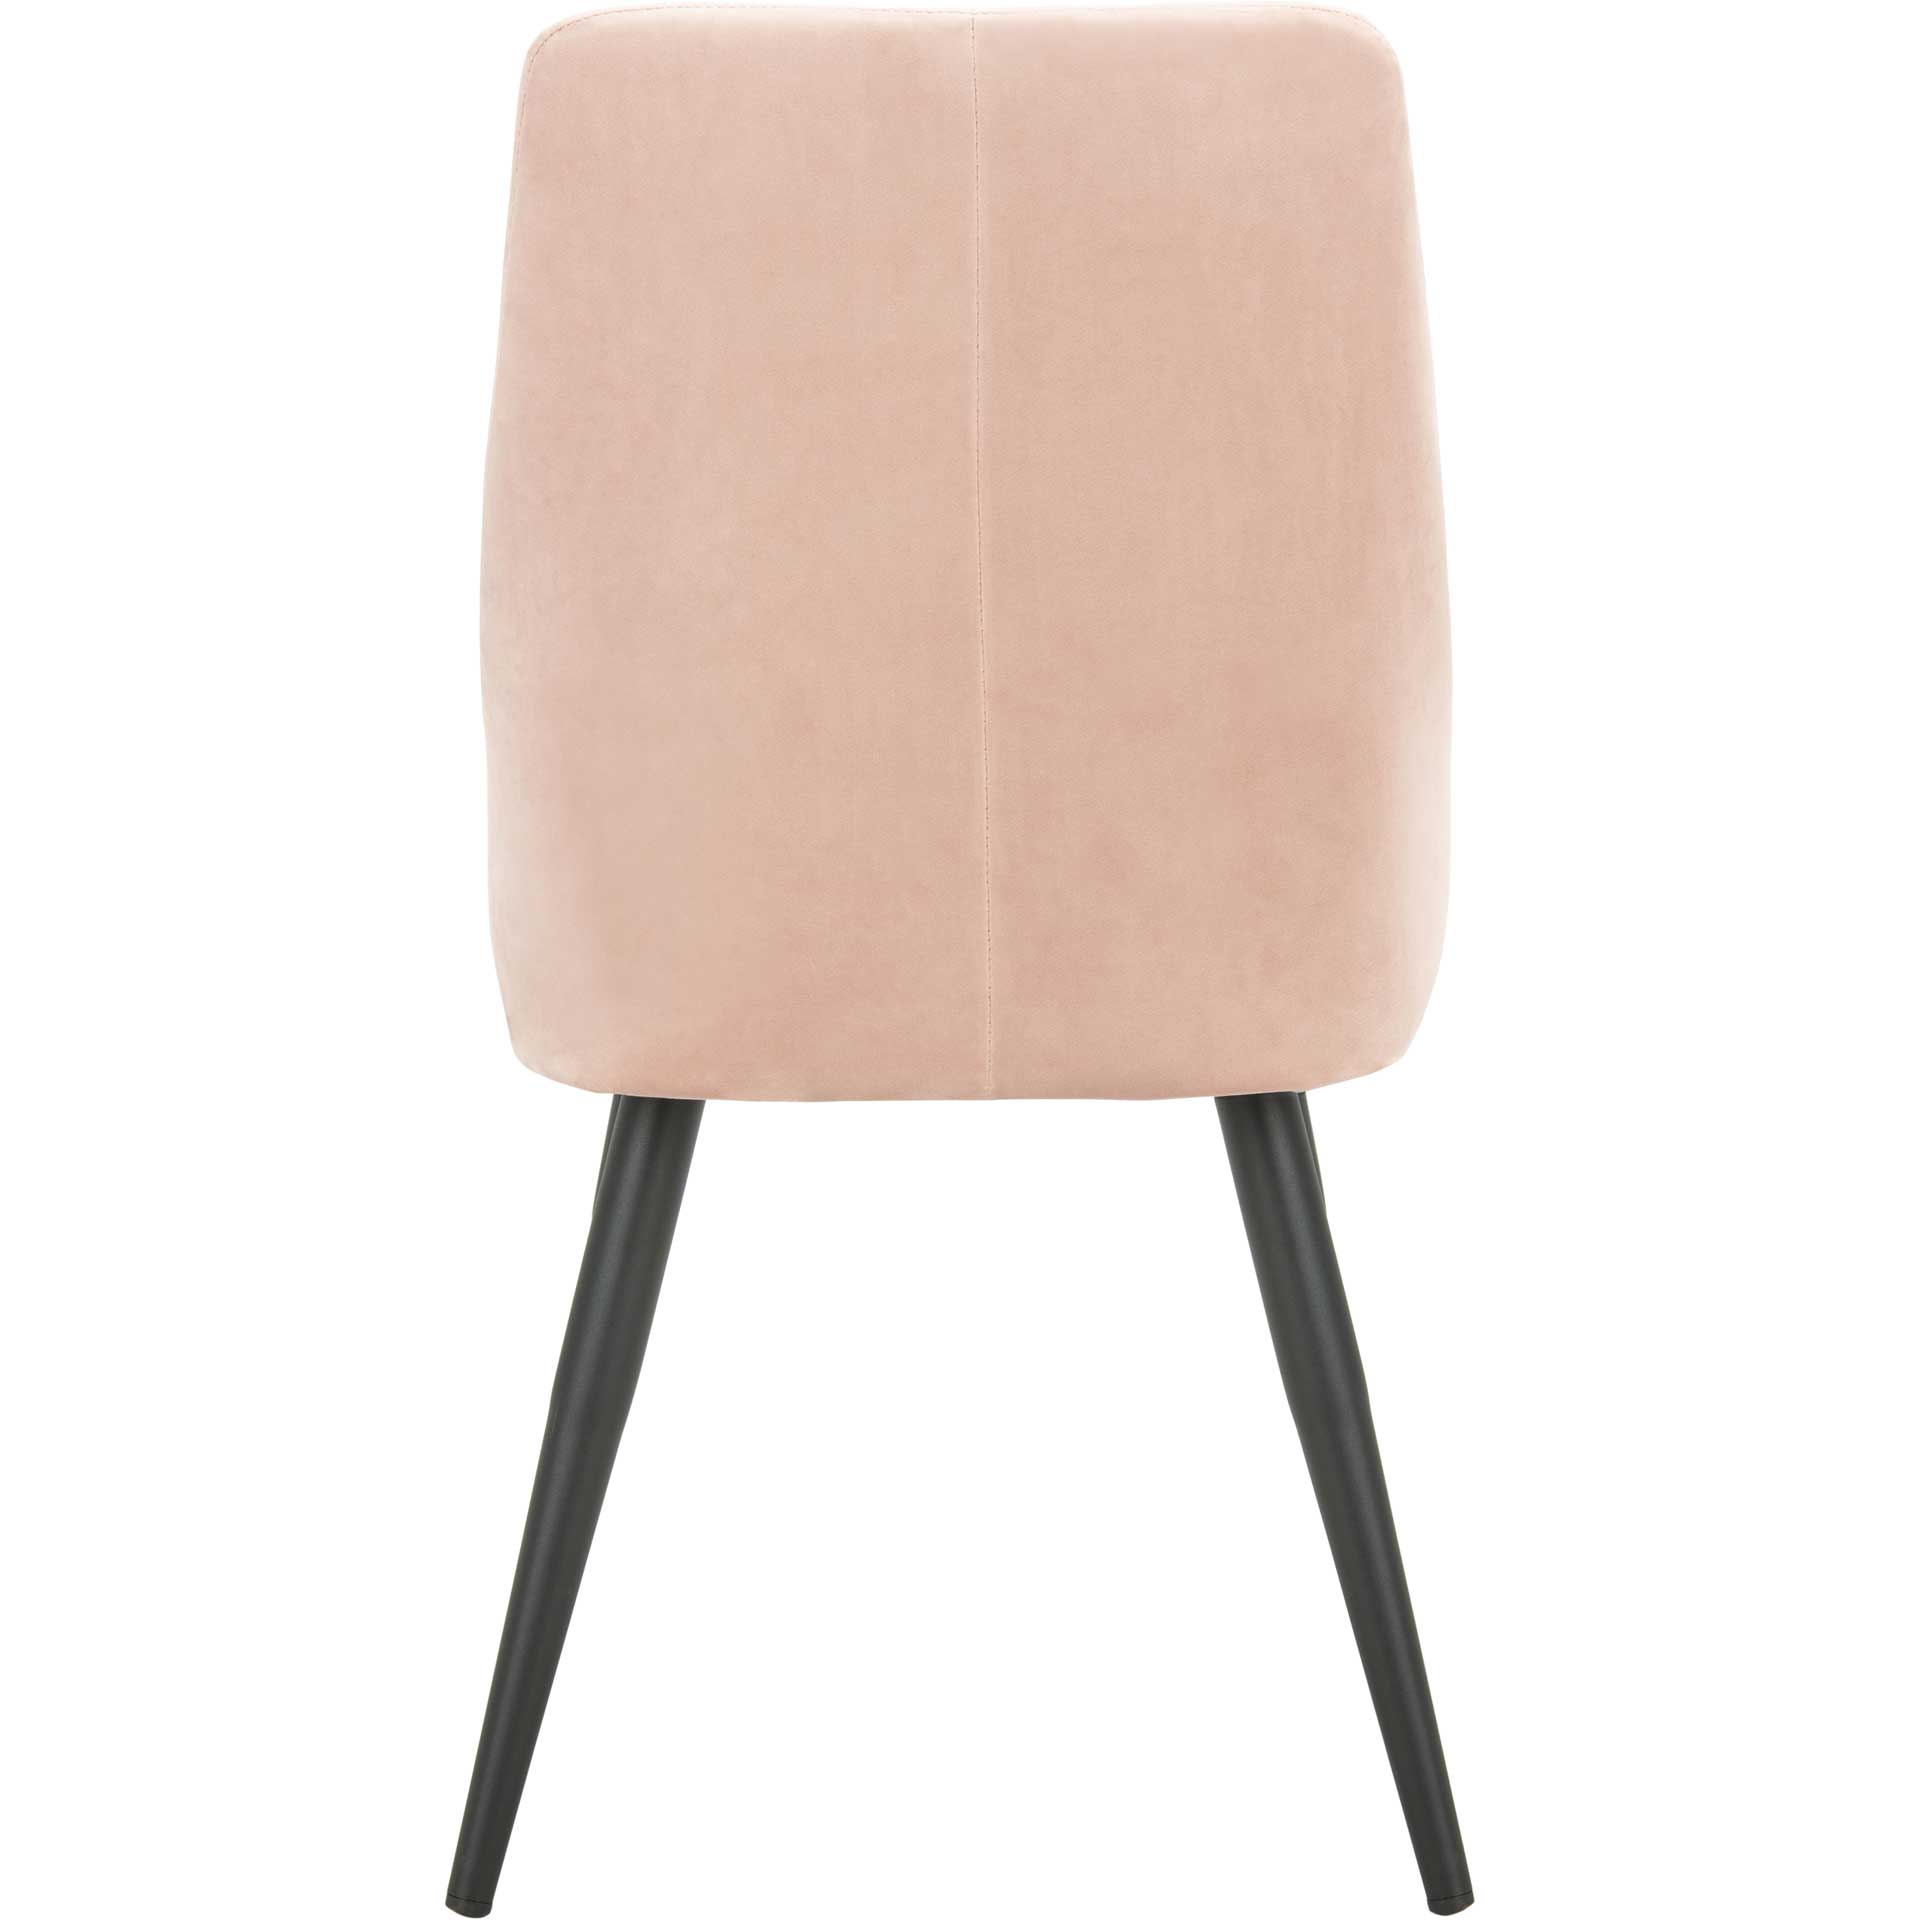 Zola Upholstered Dining Chair Dusty Blush/Black (Set of 2)